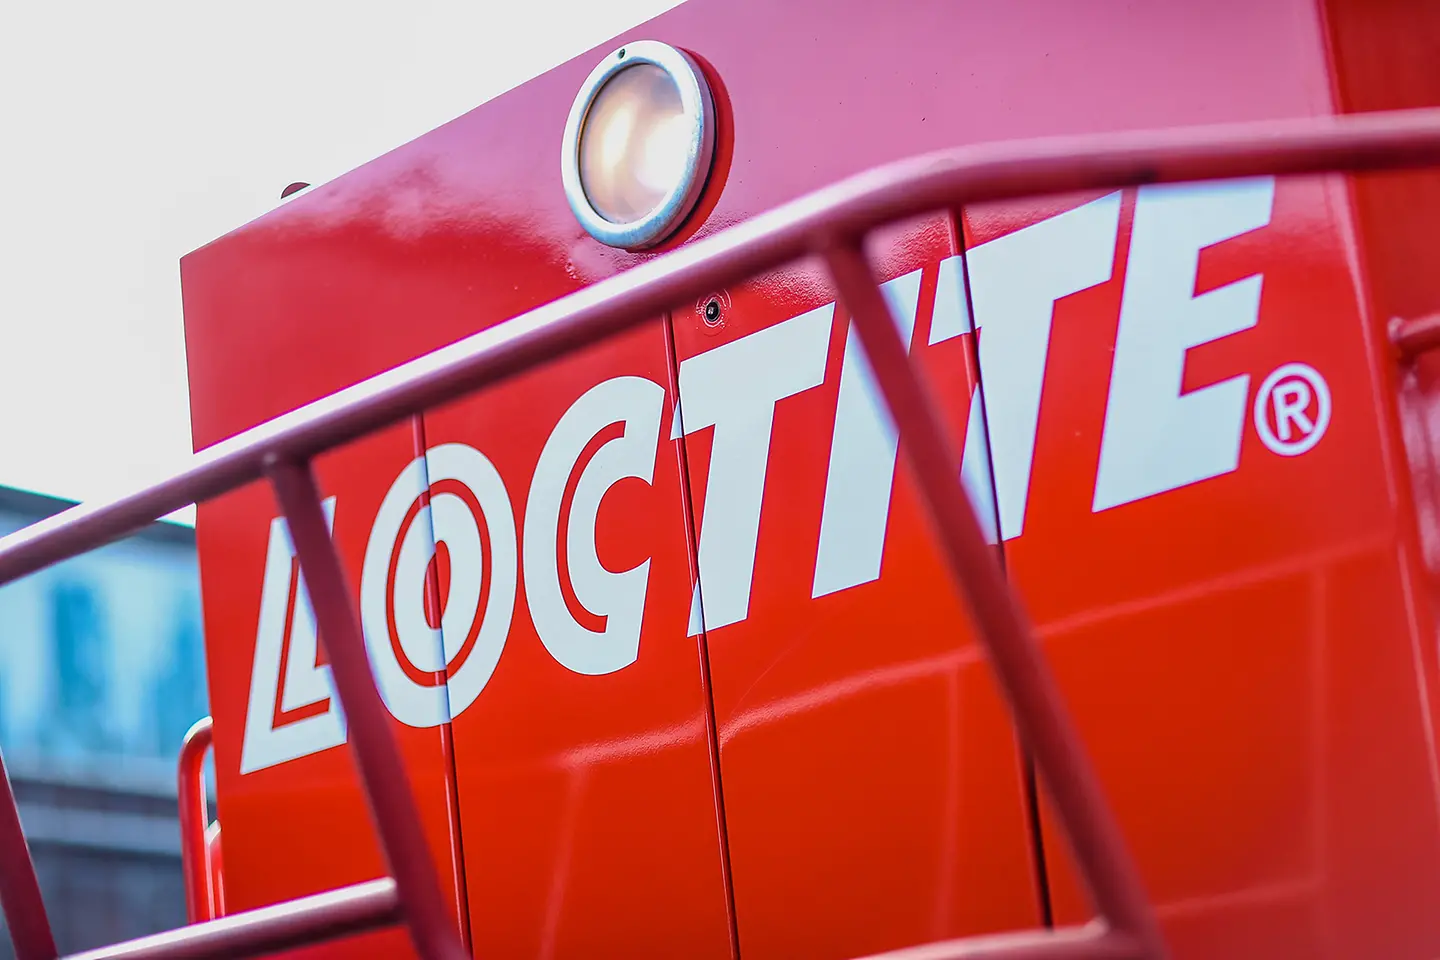 Loctite logo on the front of a locomotive